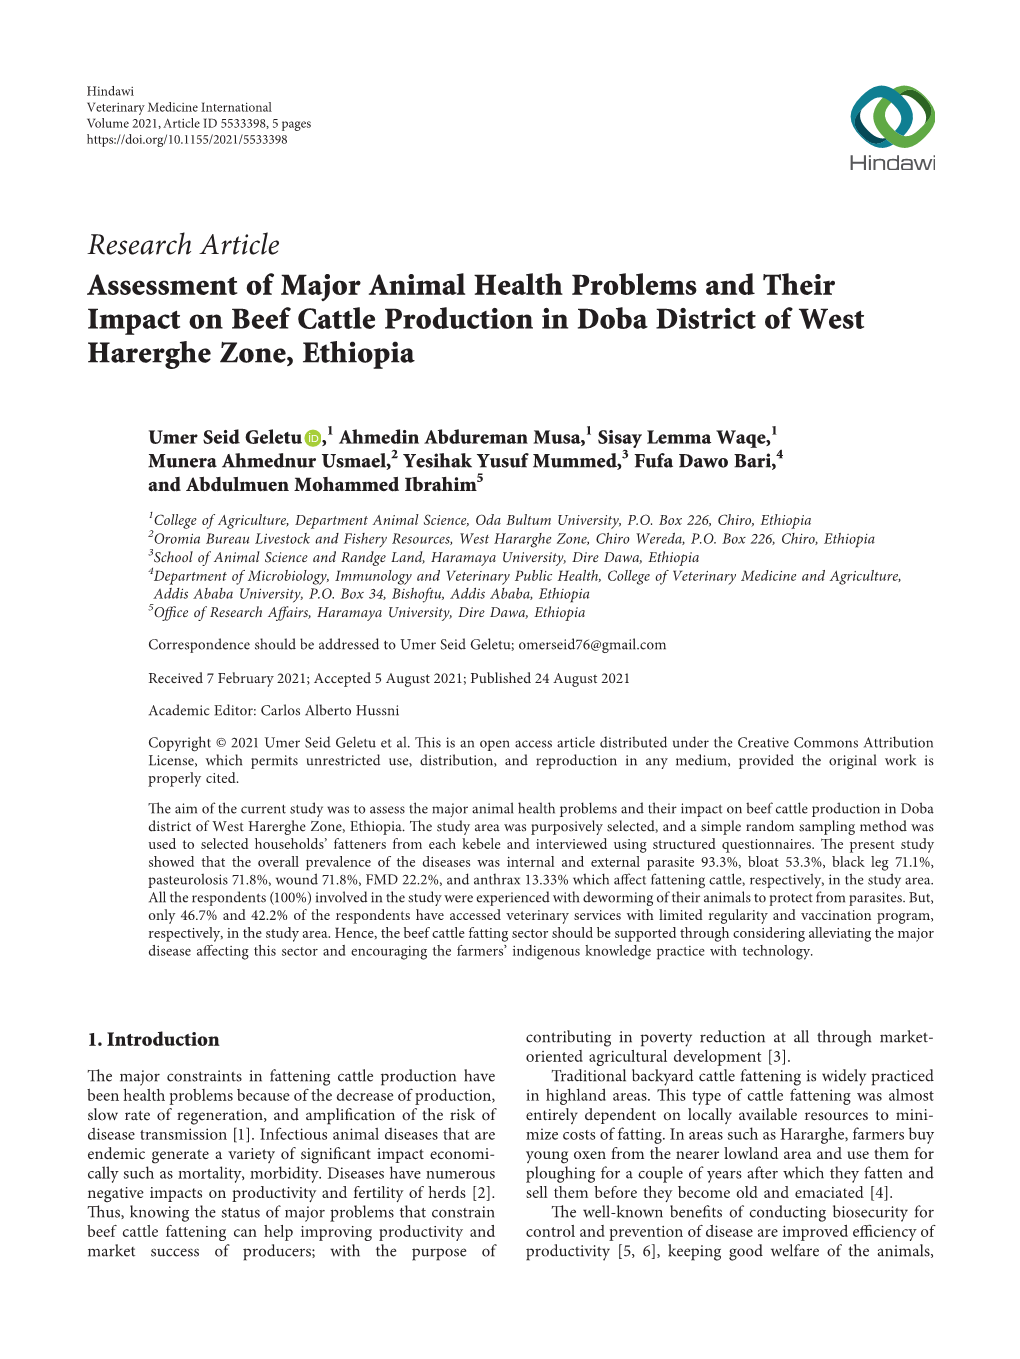 Research Article Assessment of Major Animal Health Problems and Their Impact on Beef Cattle Production in Doba District of West Harerghe Zone, Ethiopia